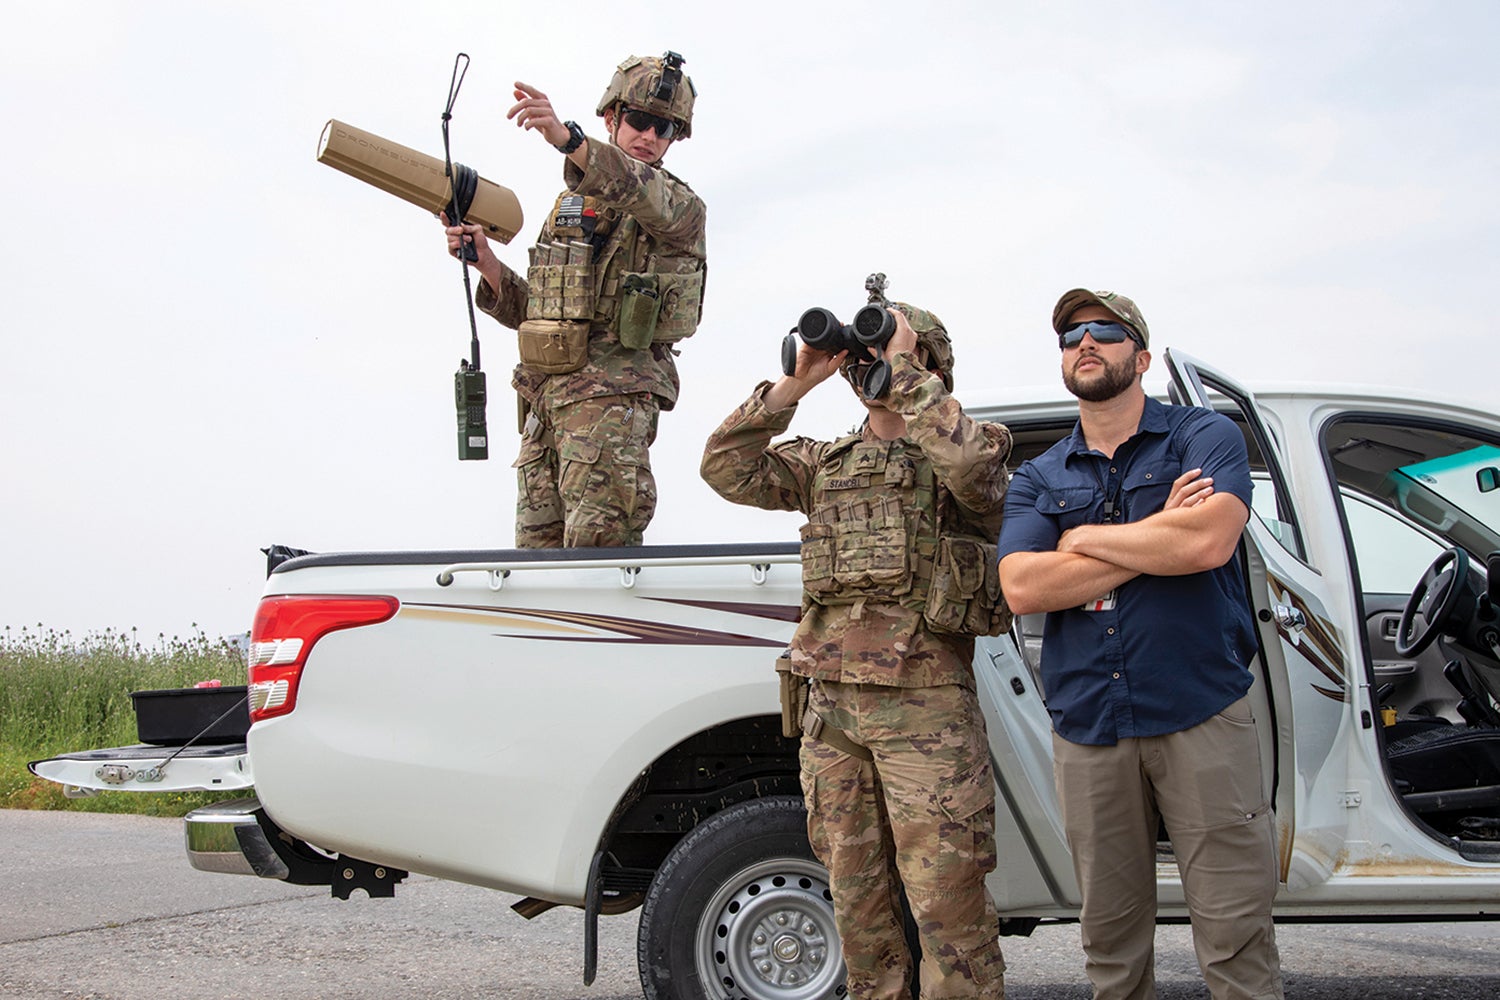 Sgt. Gentry Squier, left, points out a drone to Sgt. Gage Stancell during training at Erbil Air Base, Iraq. (Credit: U.S./Spc. Angel Ruszkiewicz)